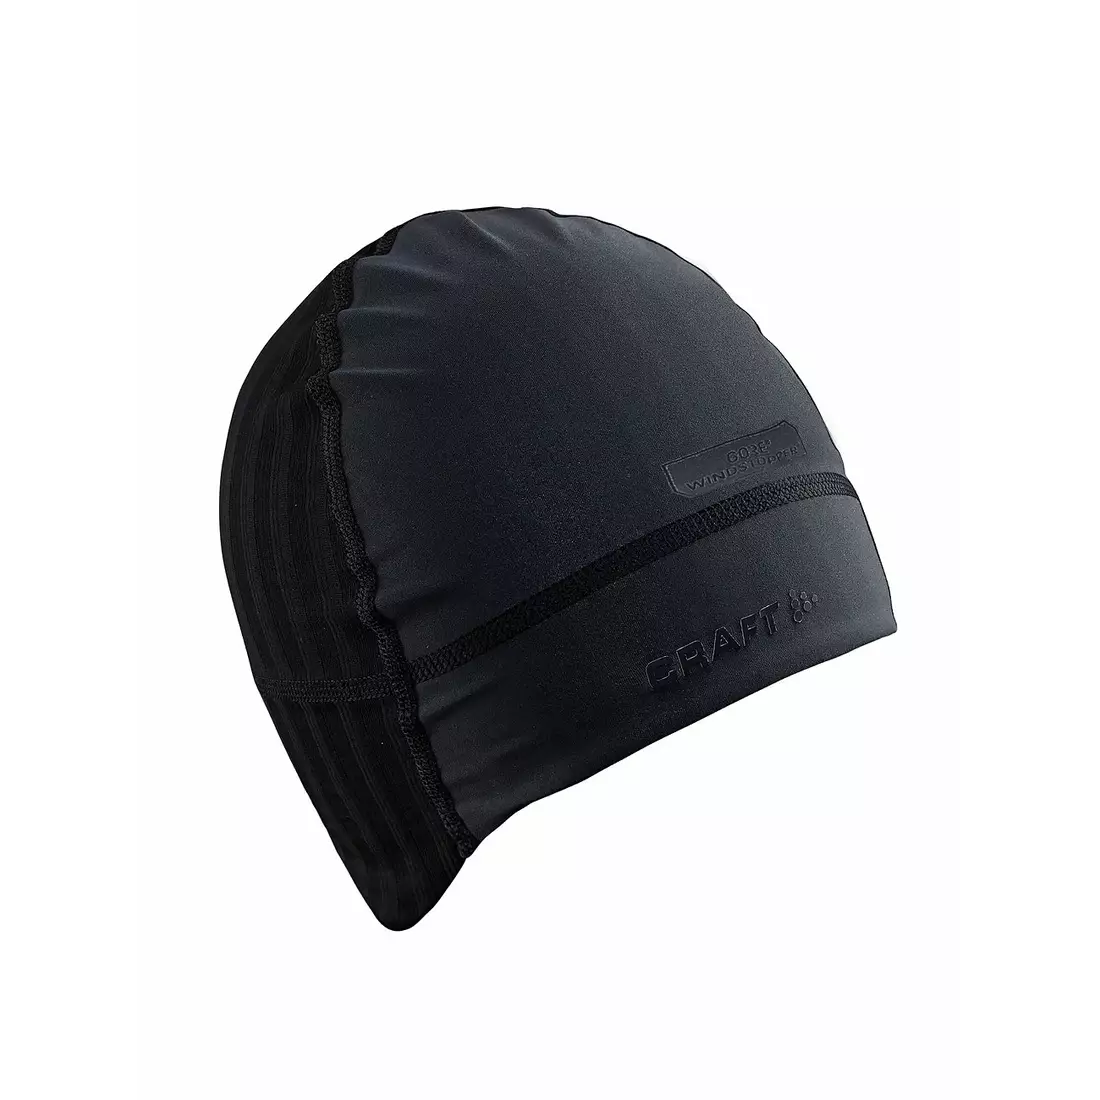 CRAFT BE ACTIVE EXTREME 2.0 WINDSTOPPER cap 1904514-9999